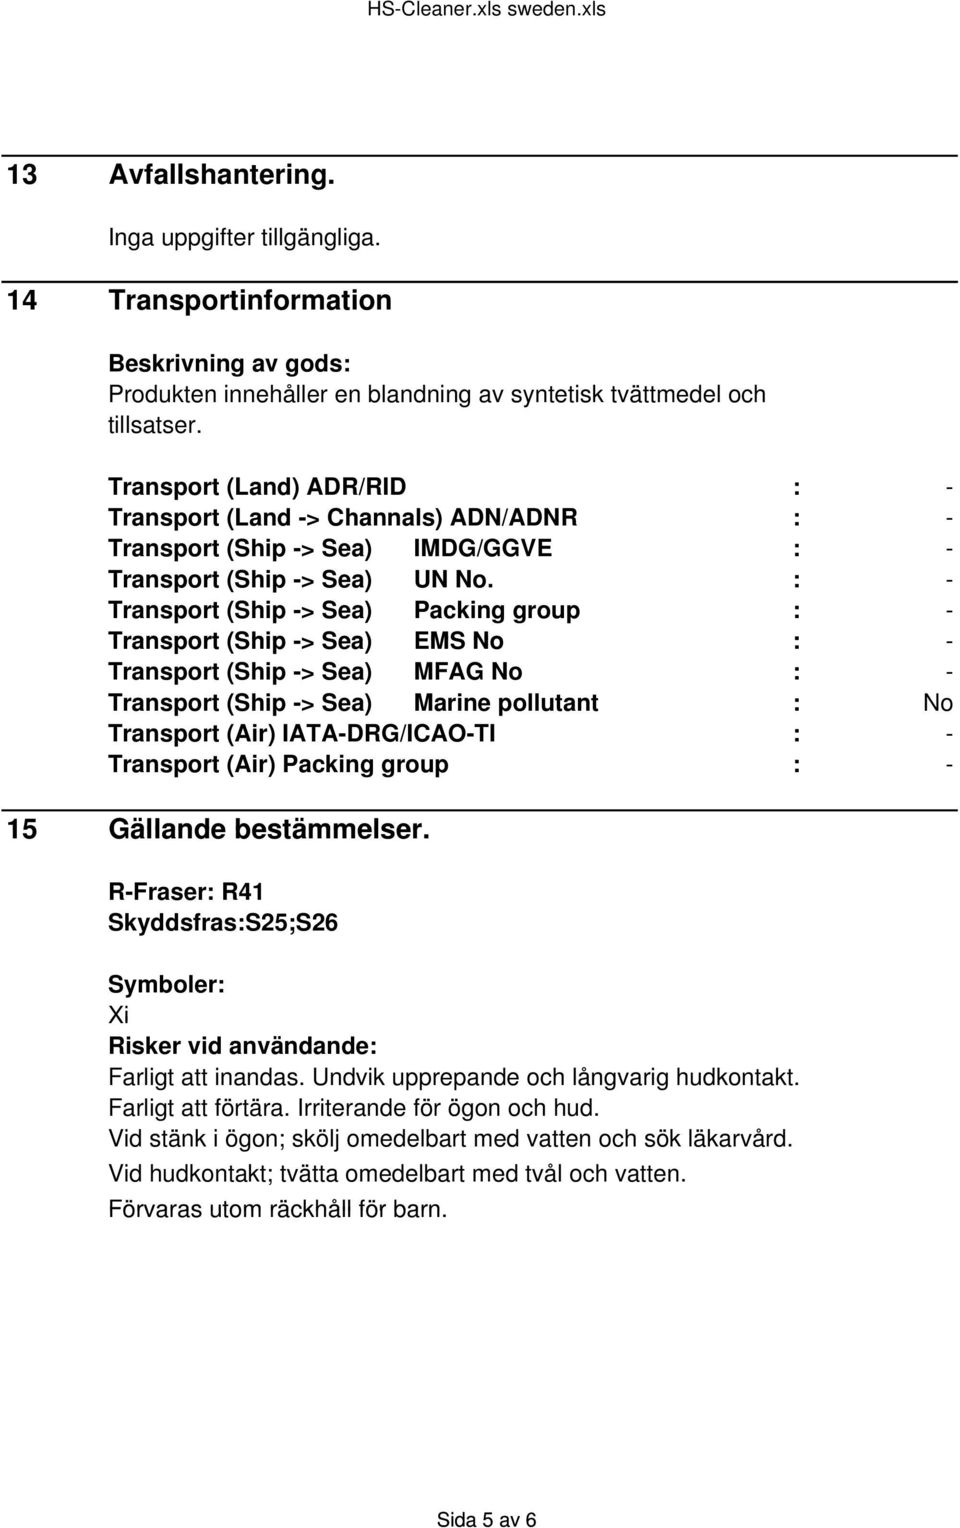 : - Transport (Ship -> Sea) Packing group : - Transport (Ship -> Sea) EMS No : - Transport (Ship -> Sea) MFAG No : - Transport (Ship -> Sea) Marine pollutant : No Transport (Air) IATA-DRG/ICAO-TI : -